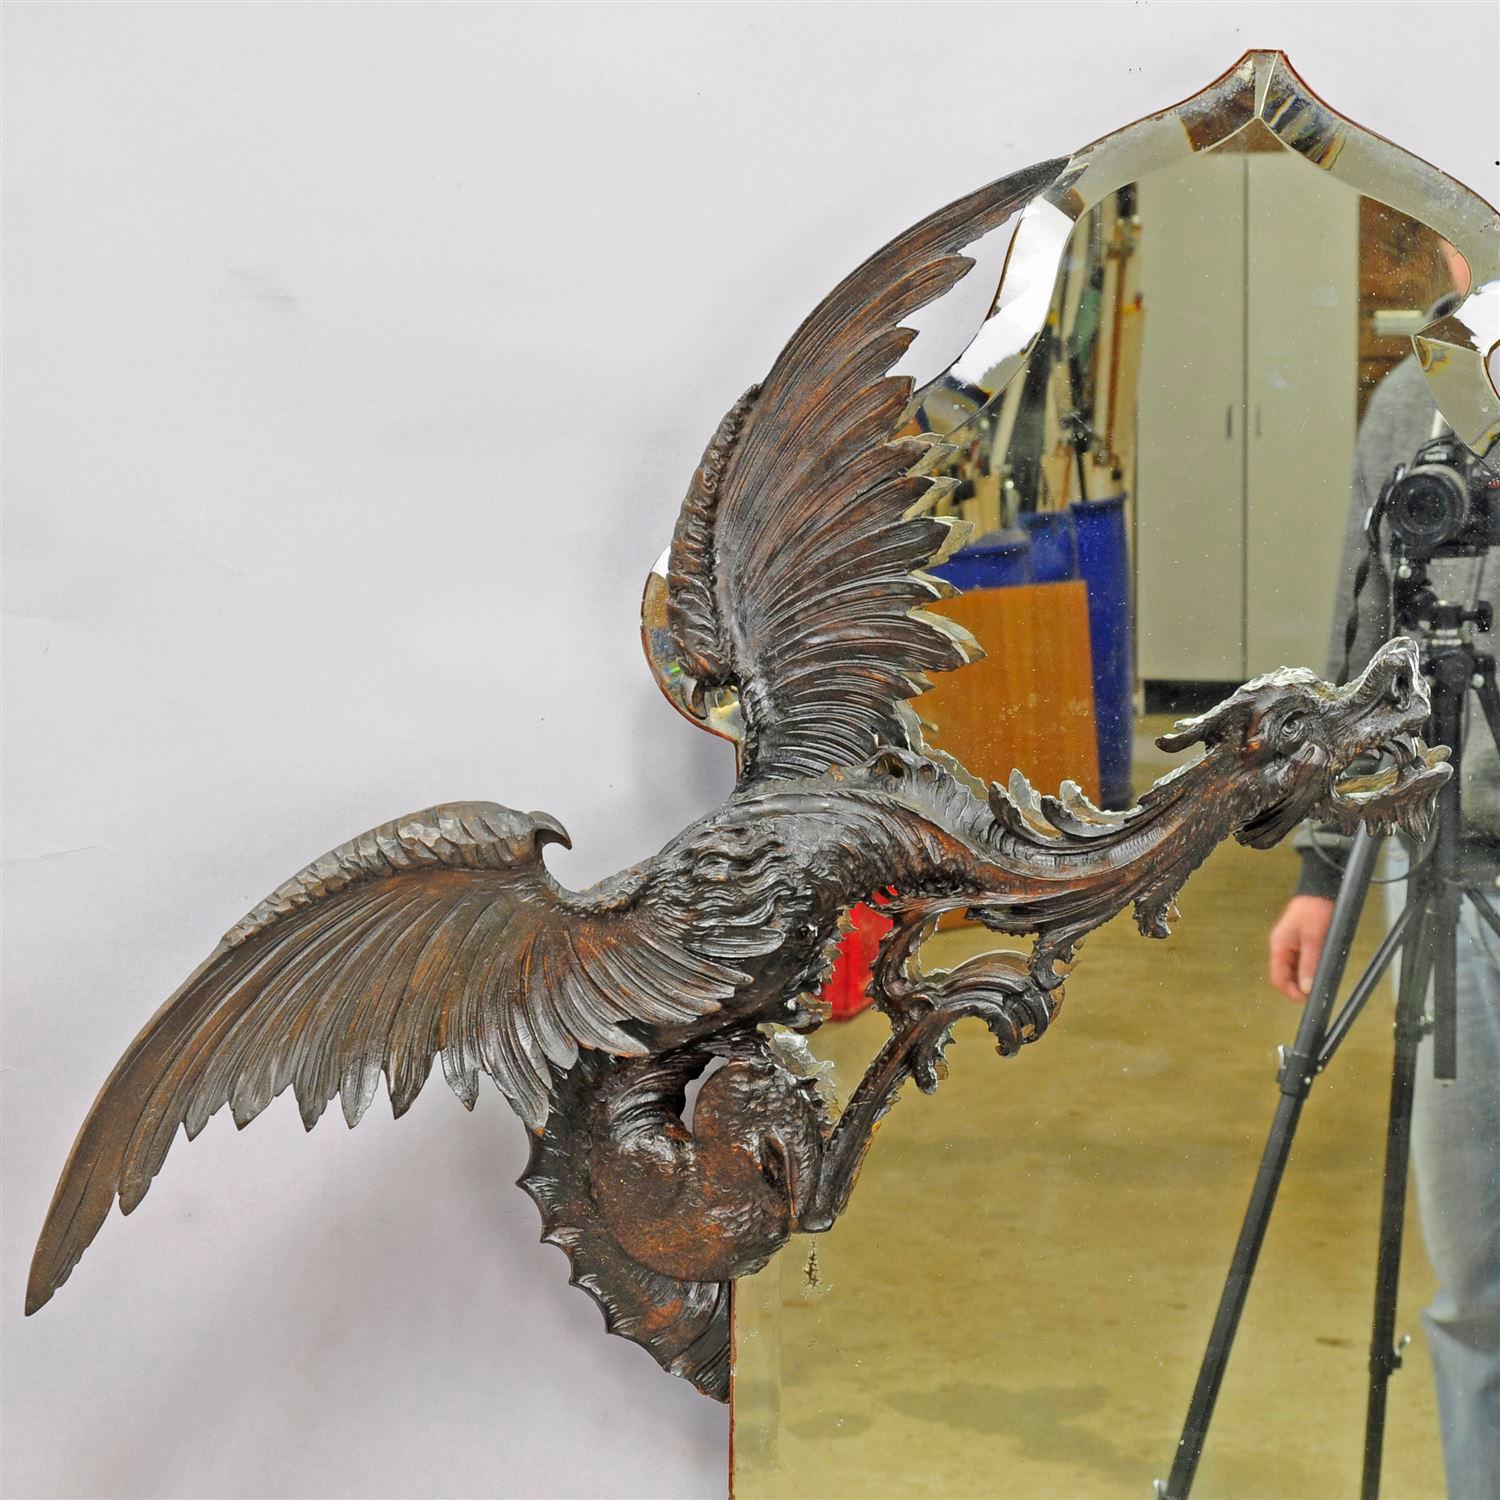 A great mystical wooden dragon sculpture surrounding an old mirror. fantastic handmade woodcarving executed circa 1890 by Testolini, Venezia, Italy in the manner of the works of Gabriel Viardot Paris. Paper label of manufacturer on the back. One